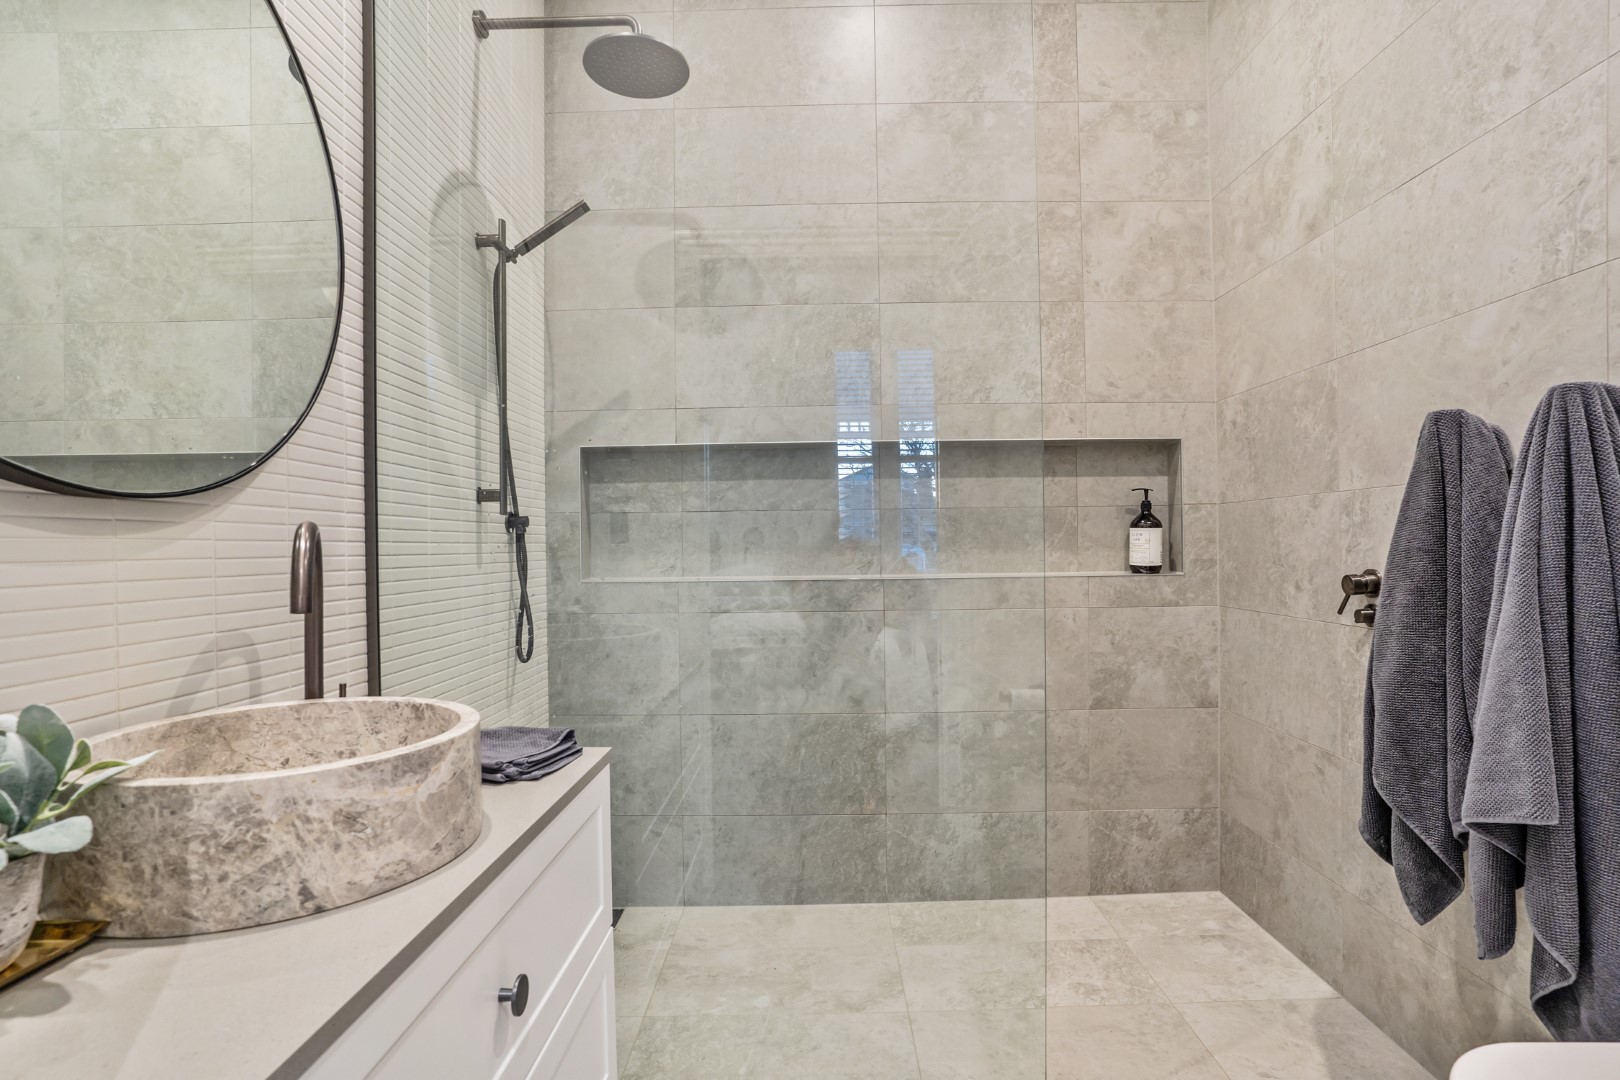 Make a bathroom renovation and increase the value of your home